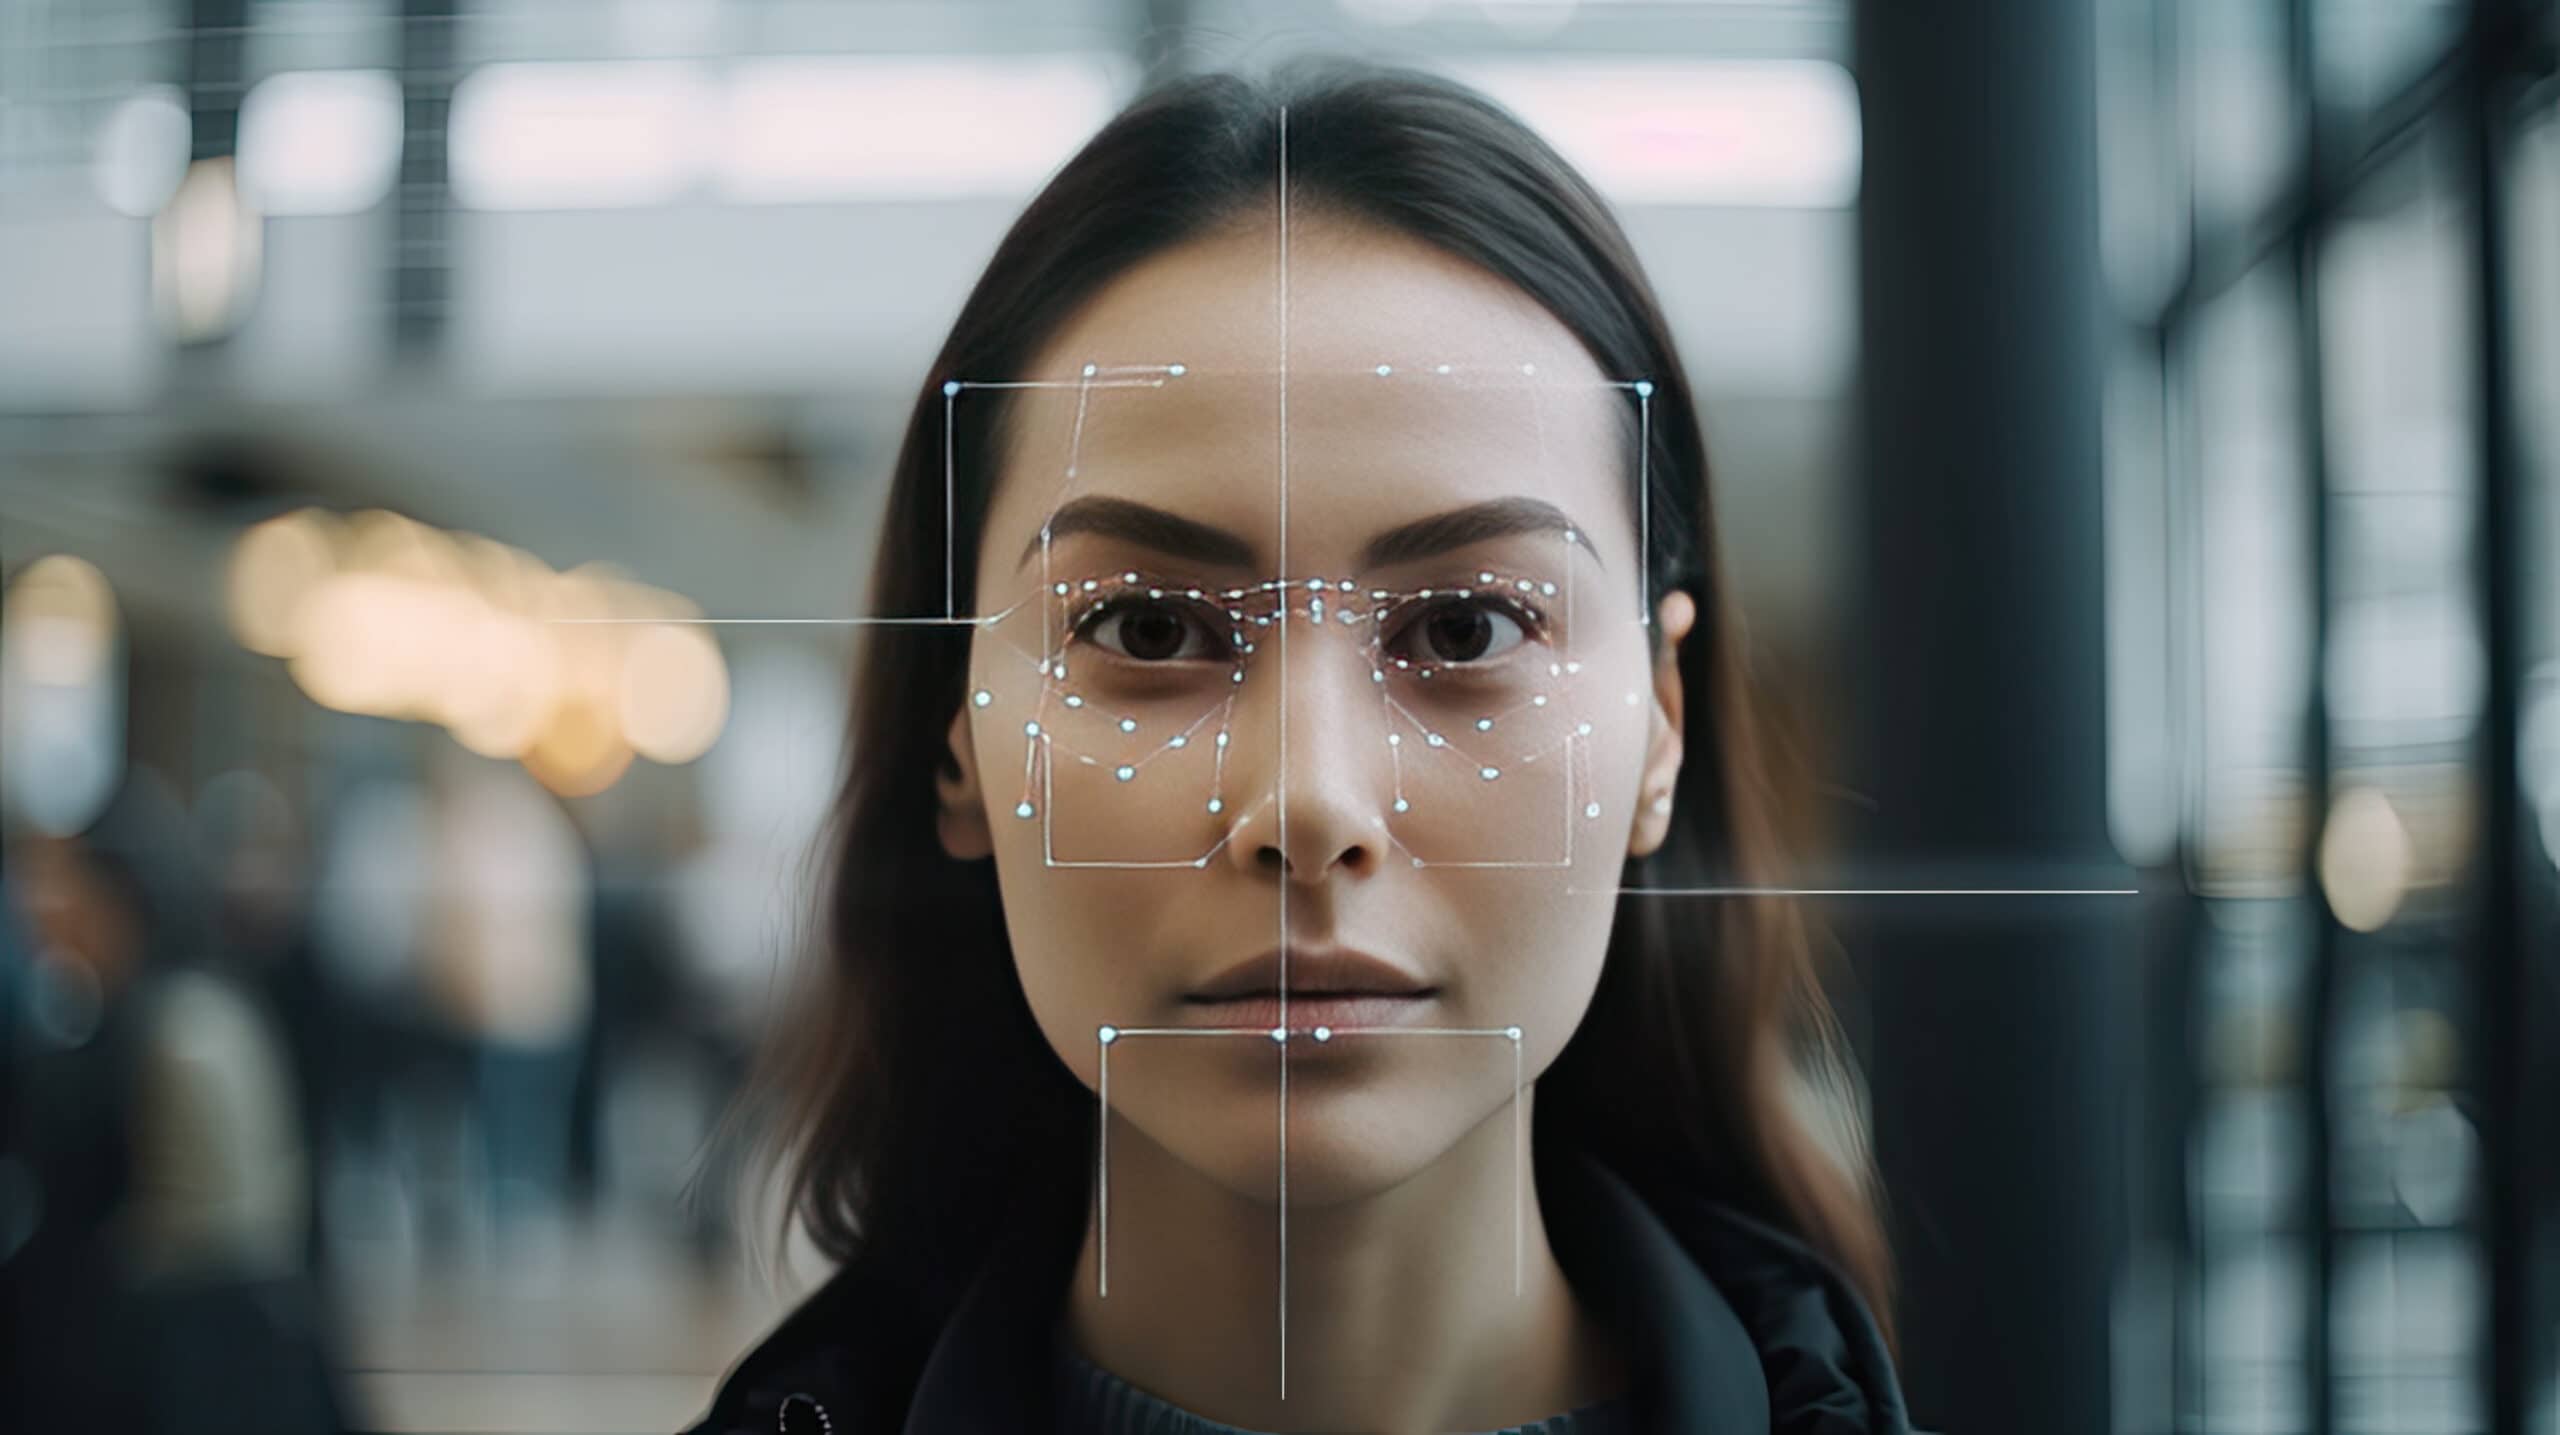 Components and Mechanism of Facial Recognition